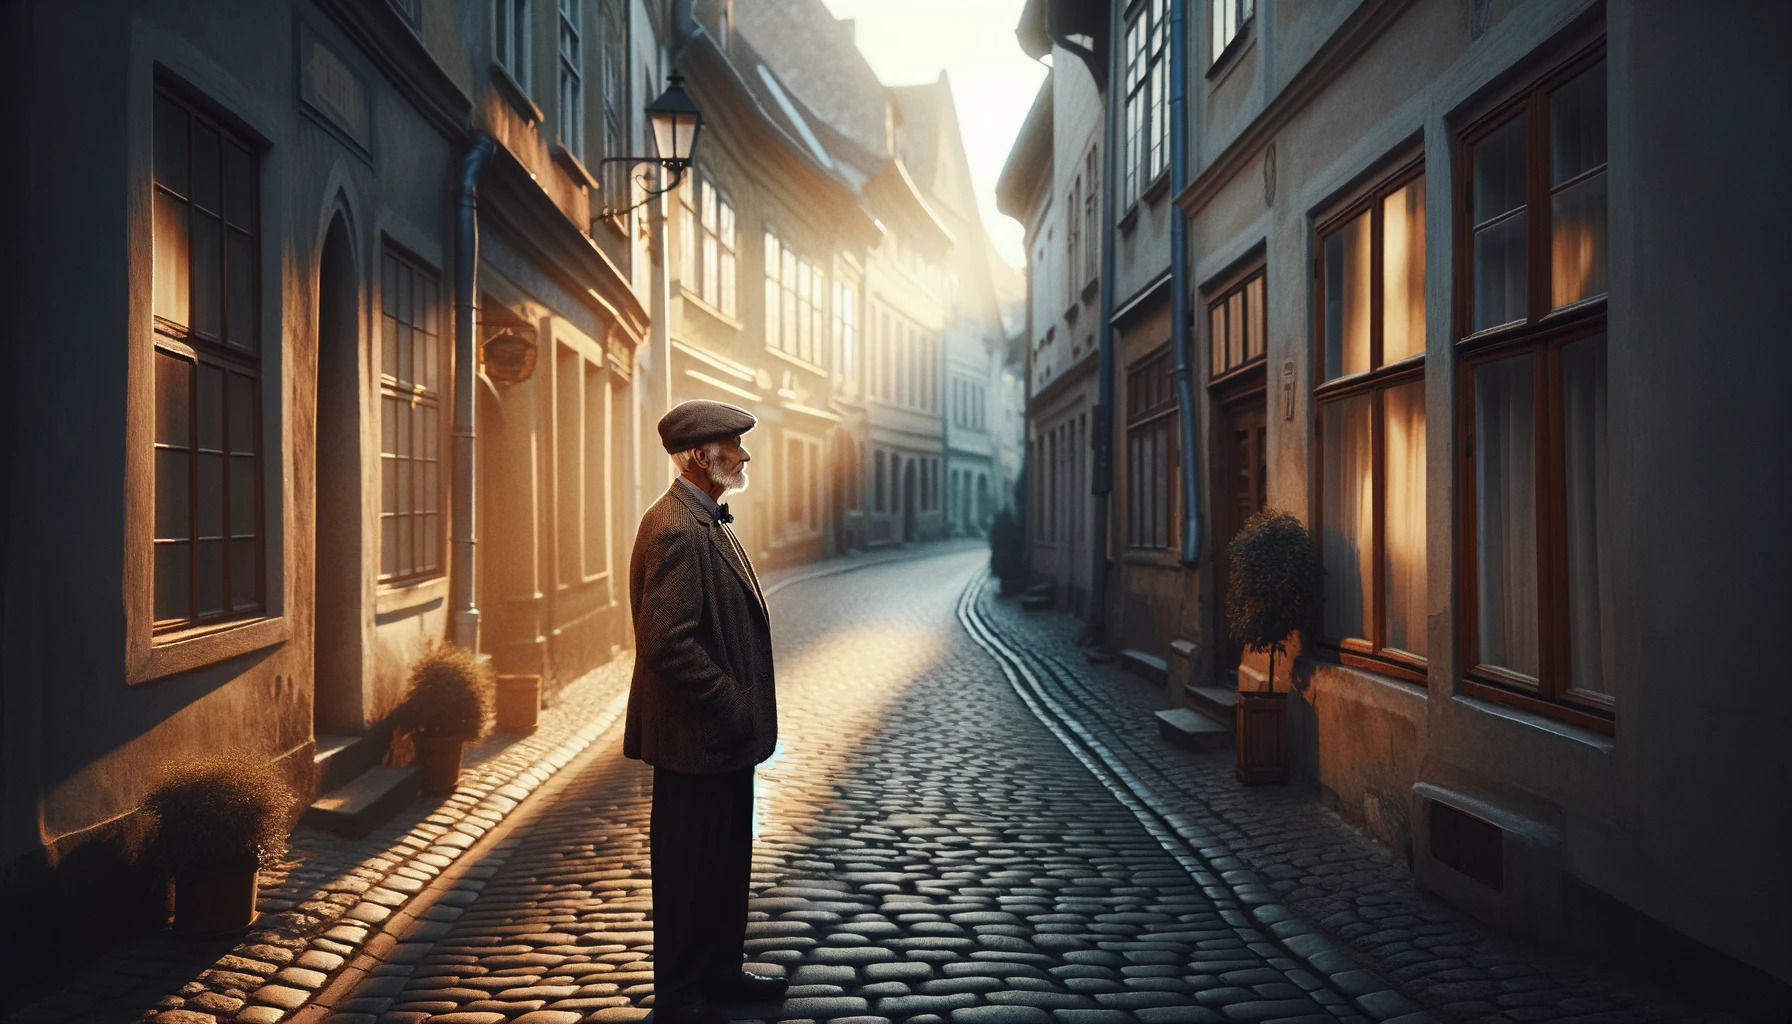 a cinematic image inspired by old man names. It captures an elderly man standing alone on a cobblestone street in a quaint old European village during early morning. The atmosphere is serene, reflecting a sense of nostalgia and timelessness.